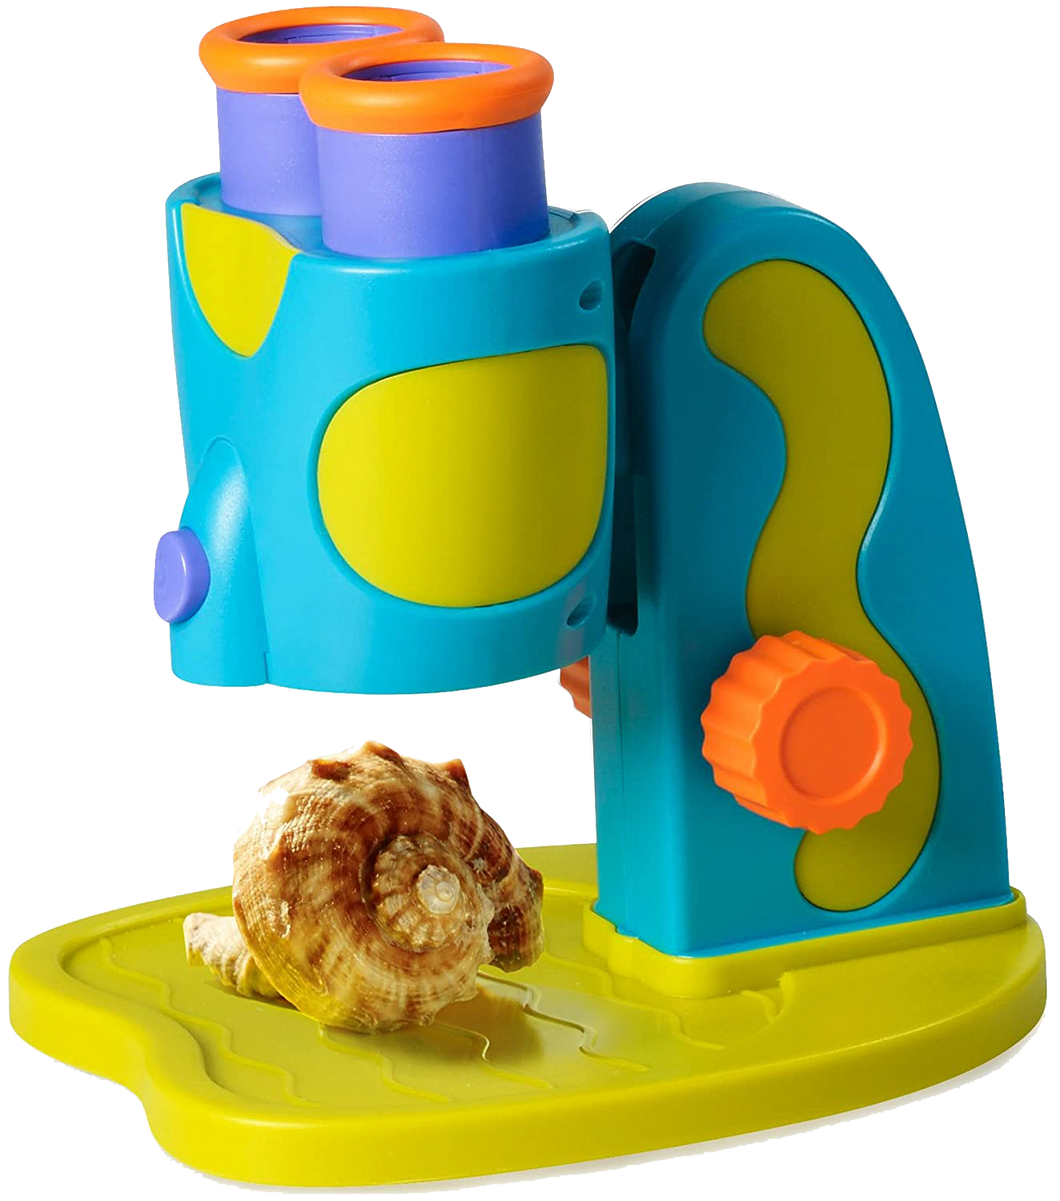 Does your child love science? Explore your world with My First Microscope.  Ignite the spark in every child! There is a light inside all of us that shines brightest when we are playing.  Specimin tray holds flat and 3D objects so your child can investigate all kinds of wonderful objects.